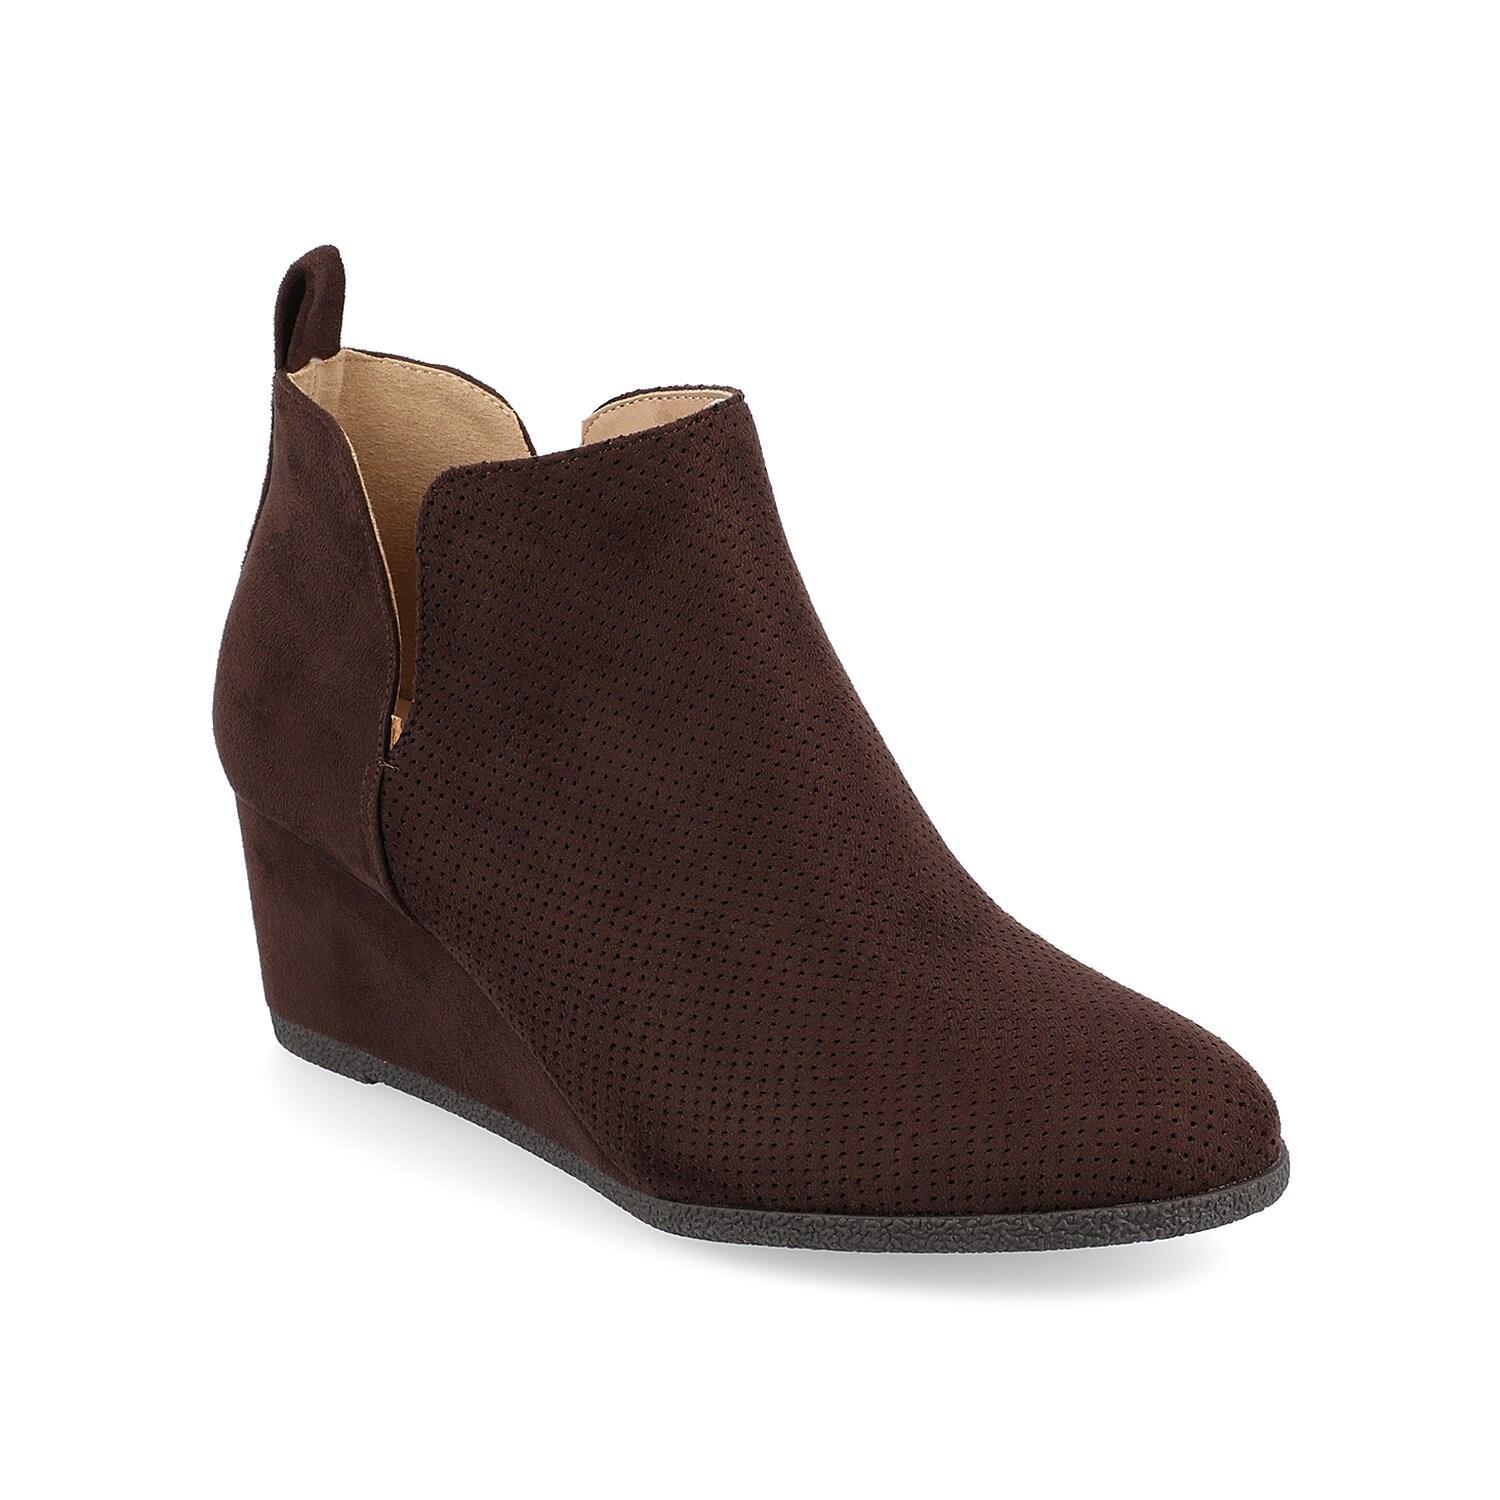 Journee Collection Mylee Womens Ankle Boots Brown Product Image